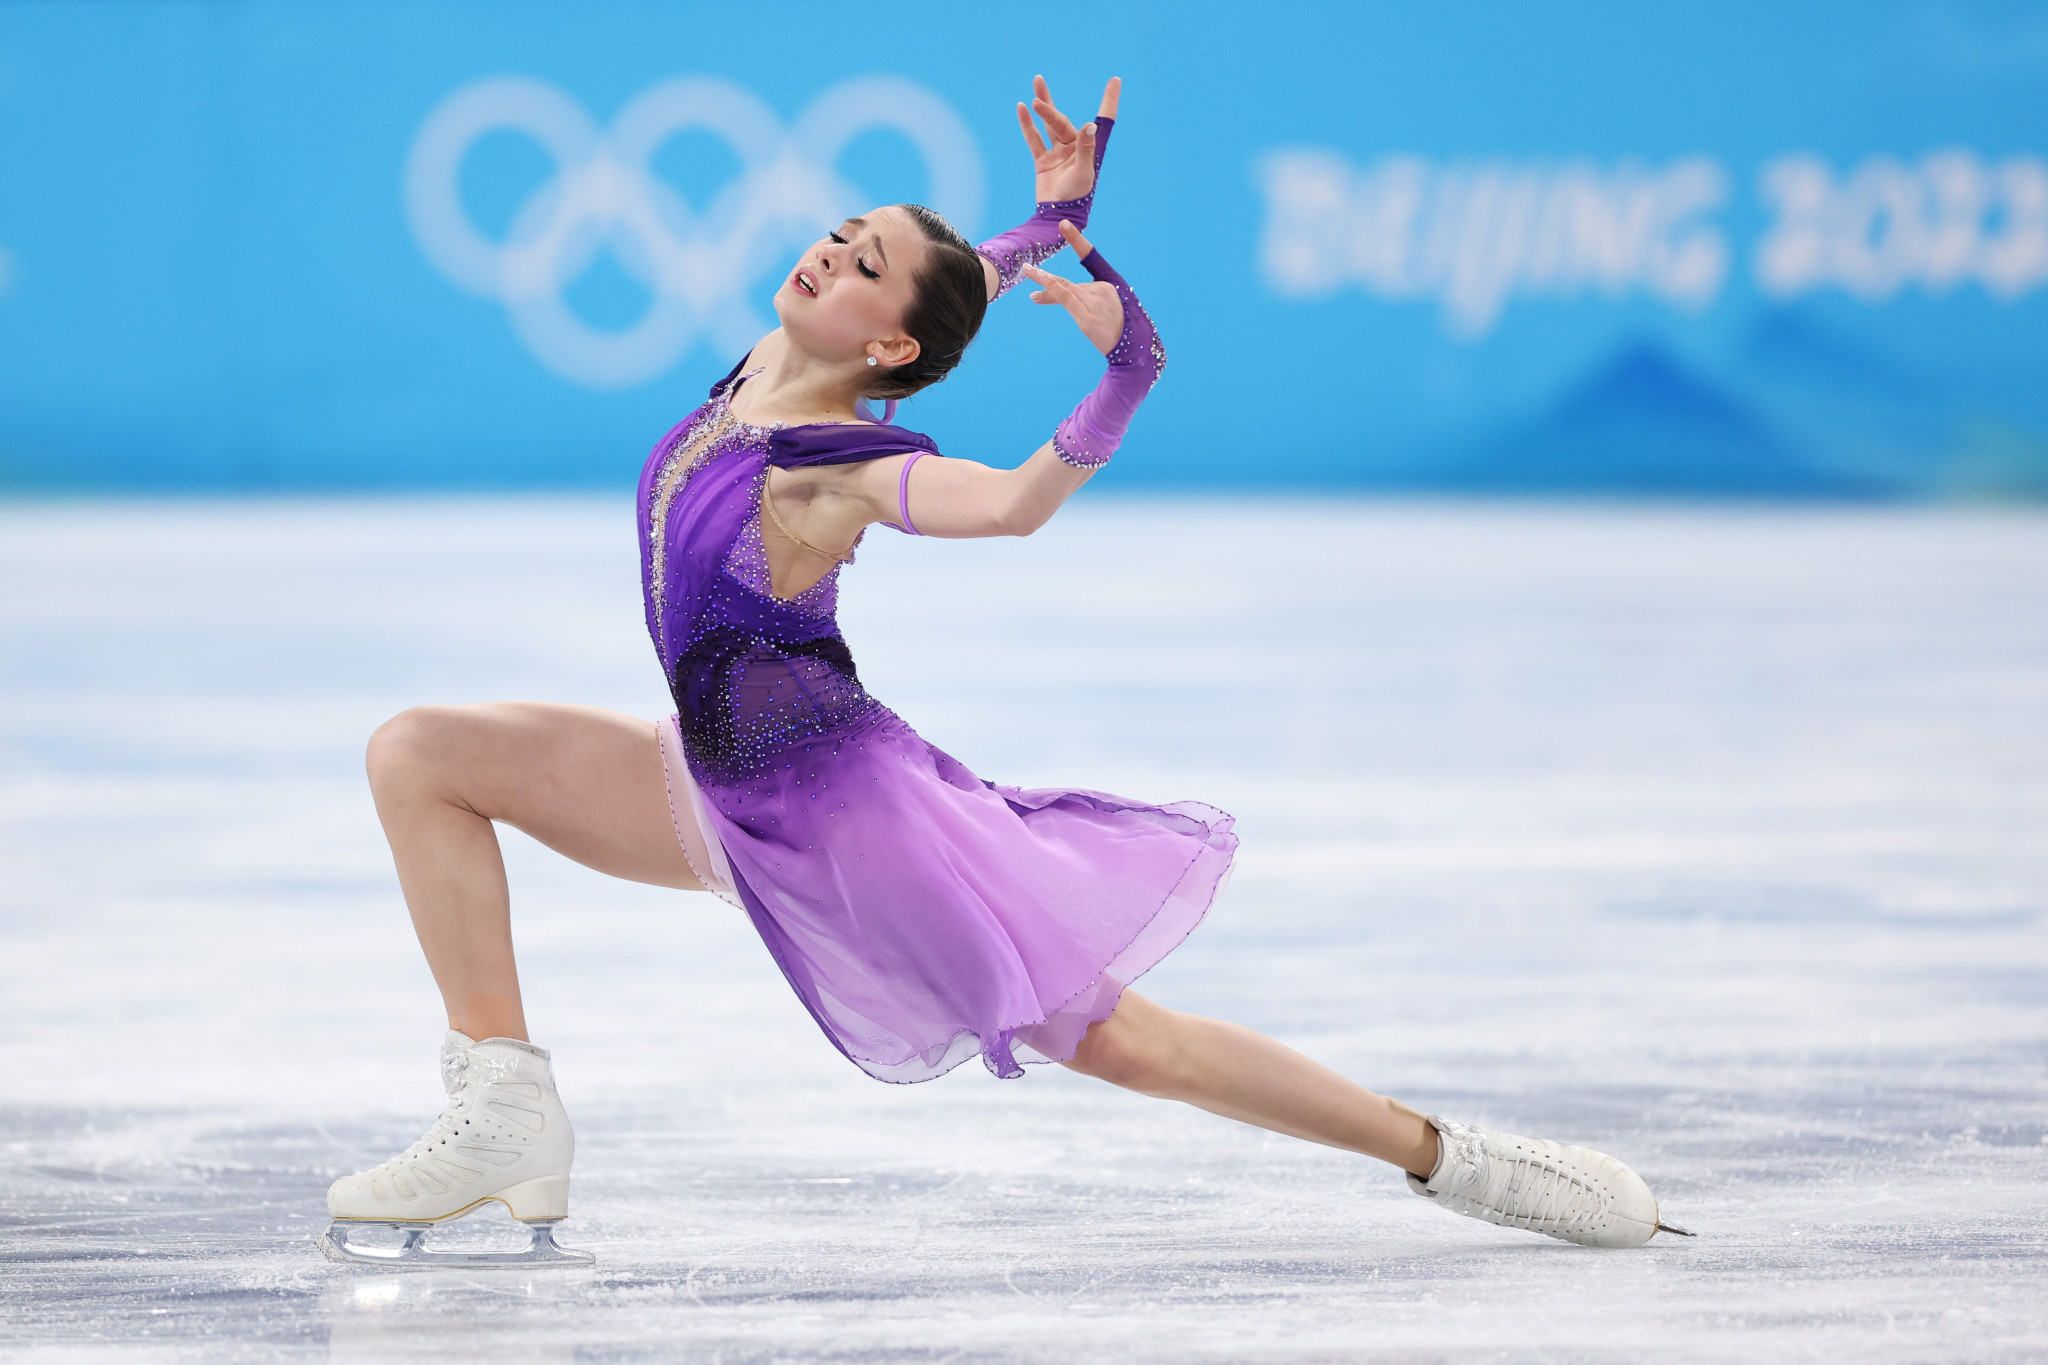 "Asterisk" next to figure skating results if Valieva's in top three, IOC confirm